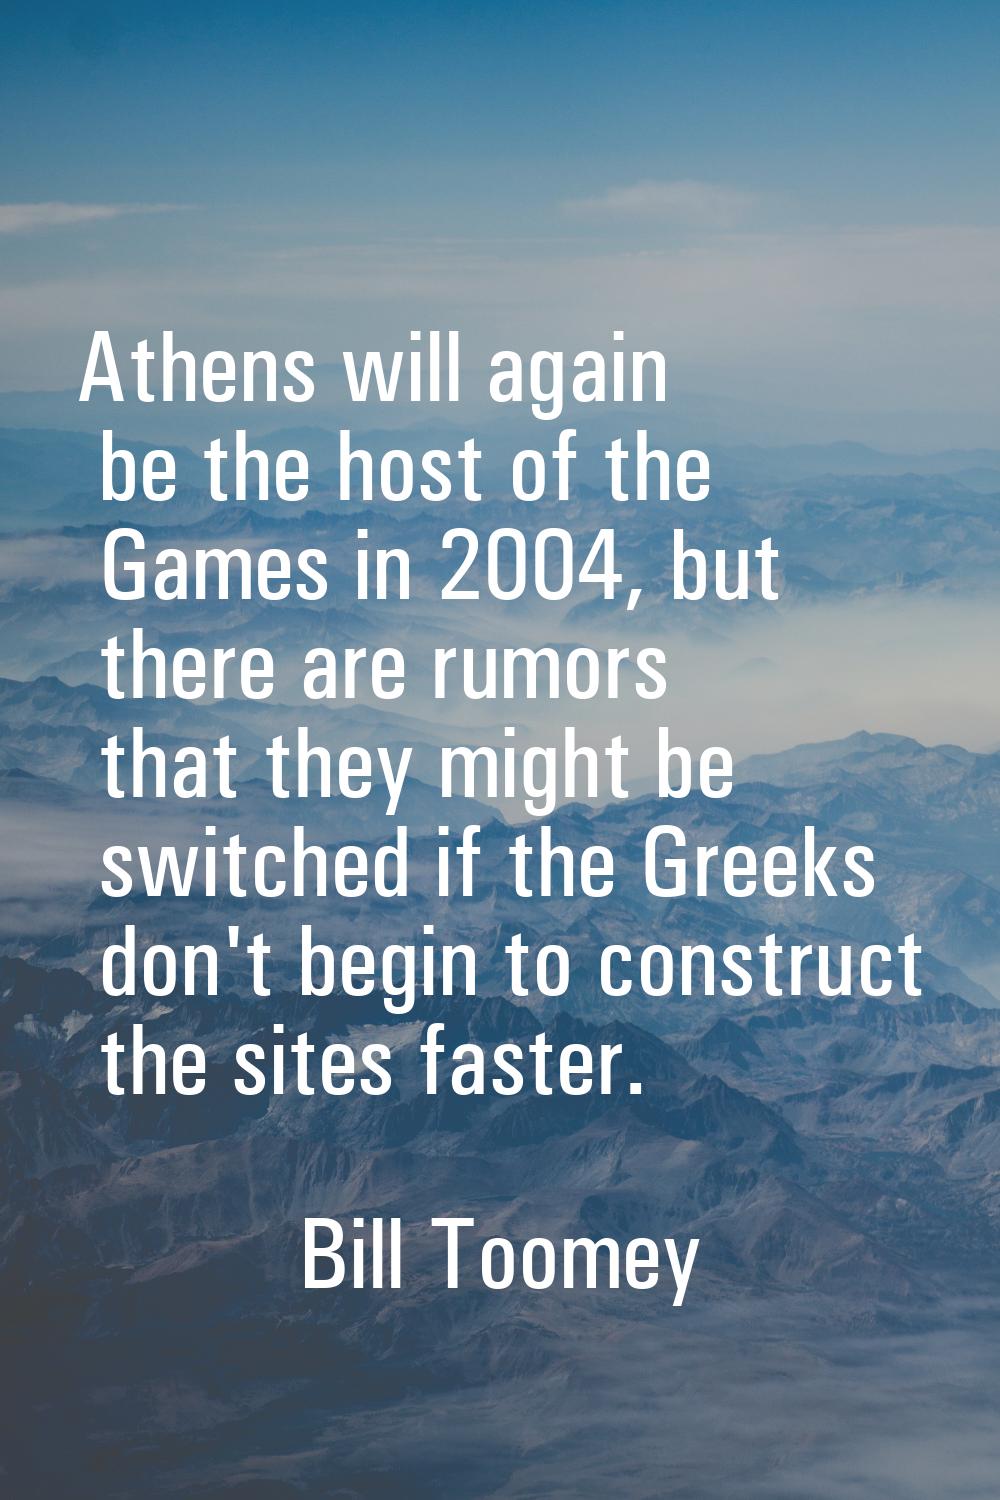 Athens will again be the host of the Games in 2004, but there are rumors that they might be switche